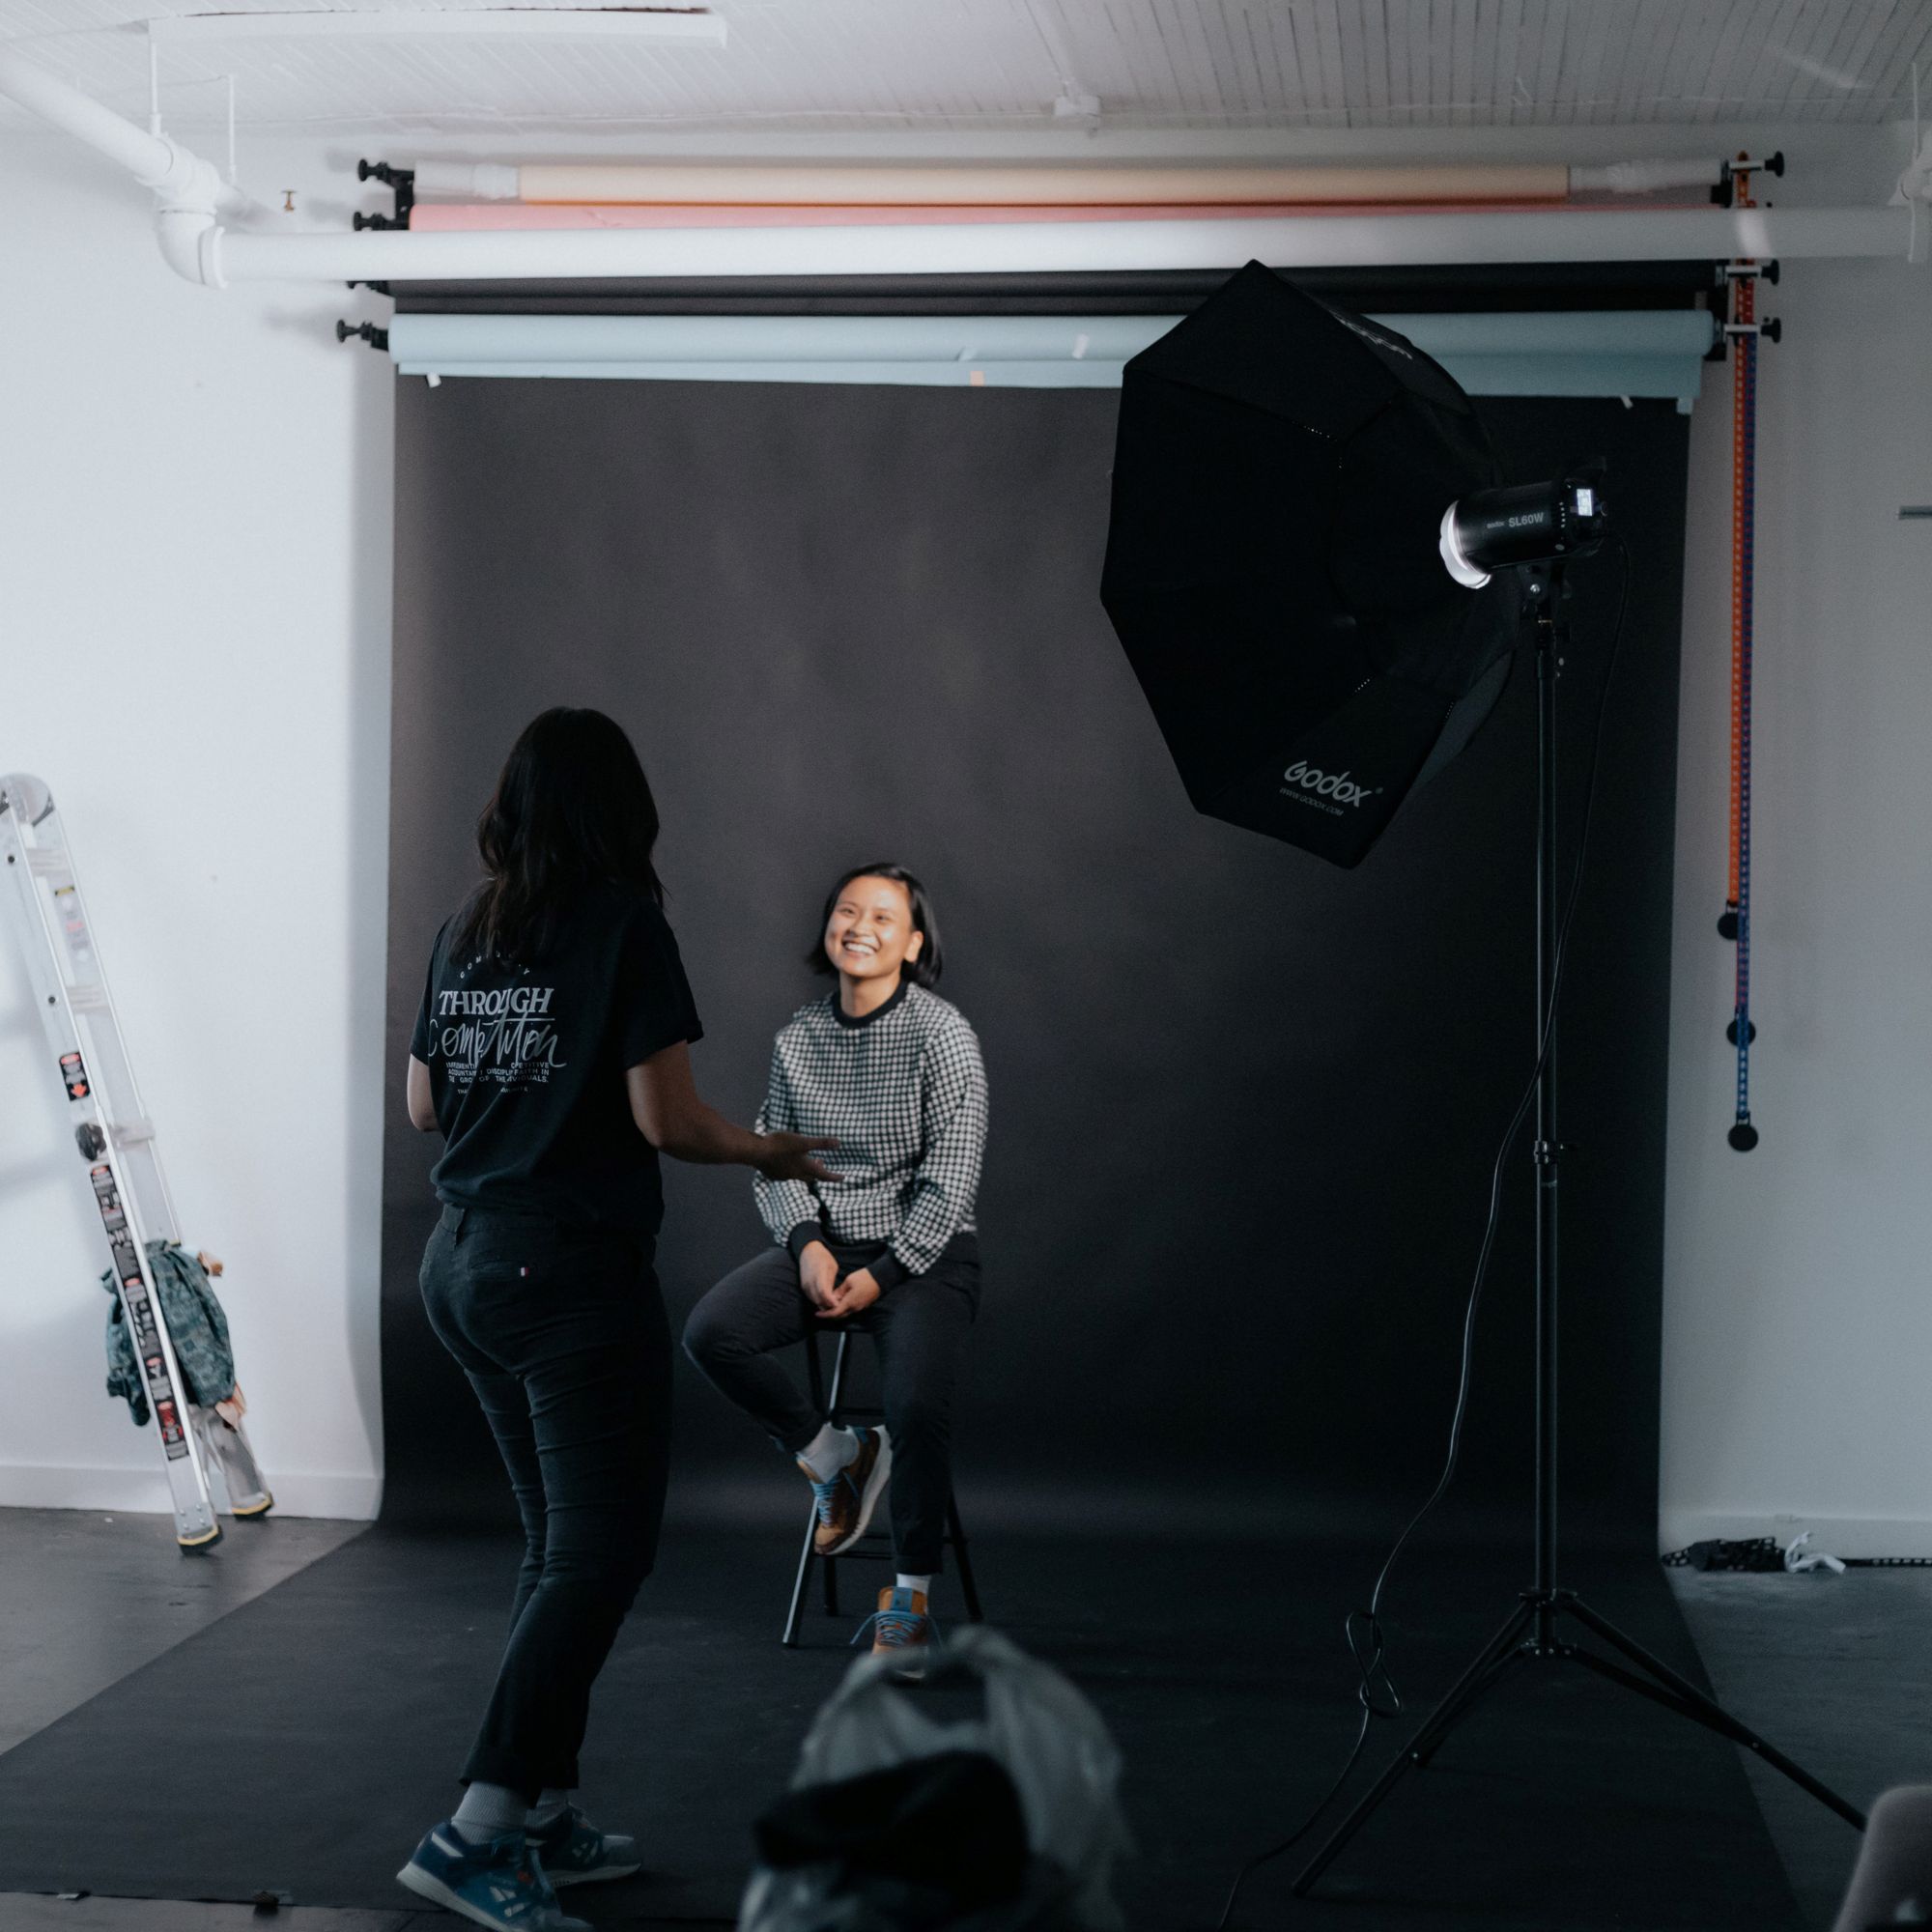 Guide on Studio Photography